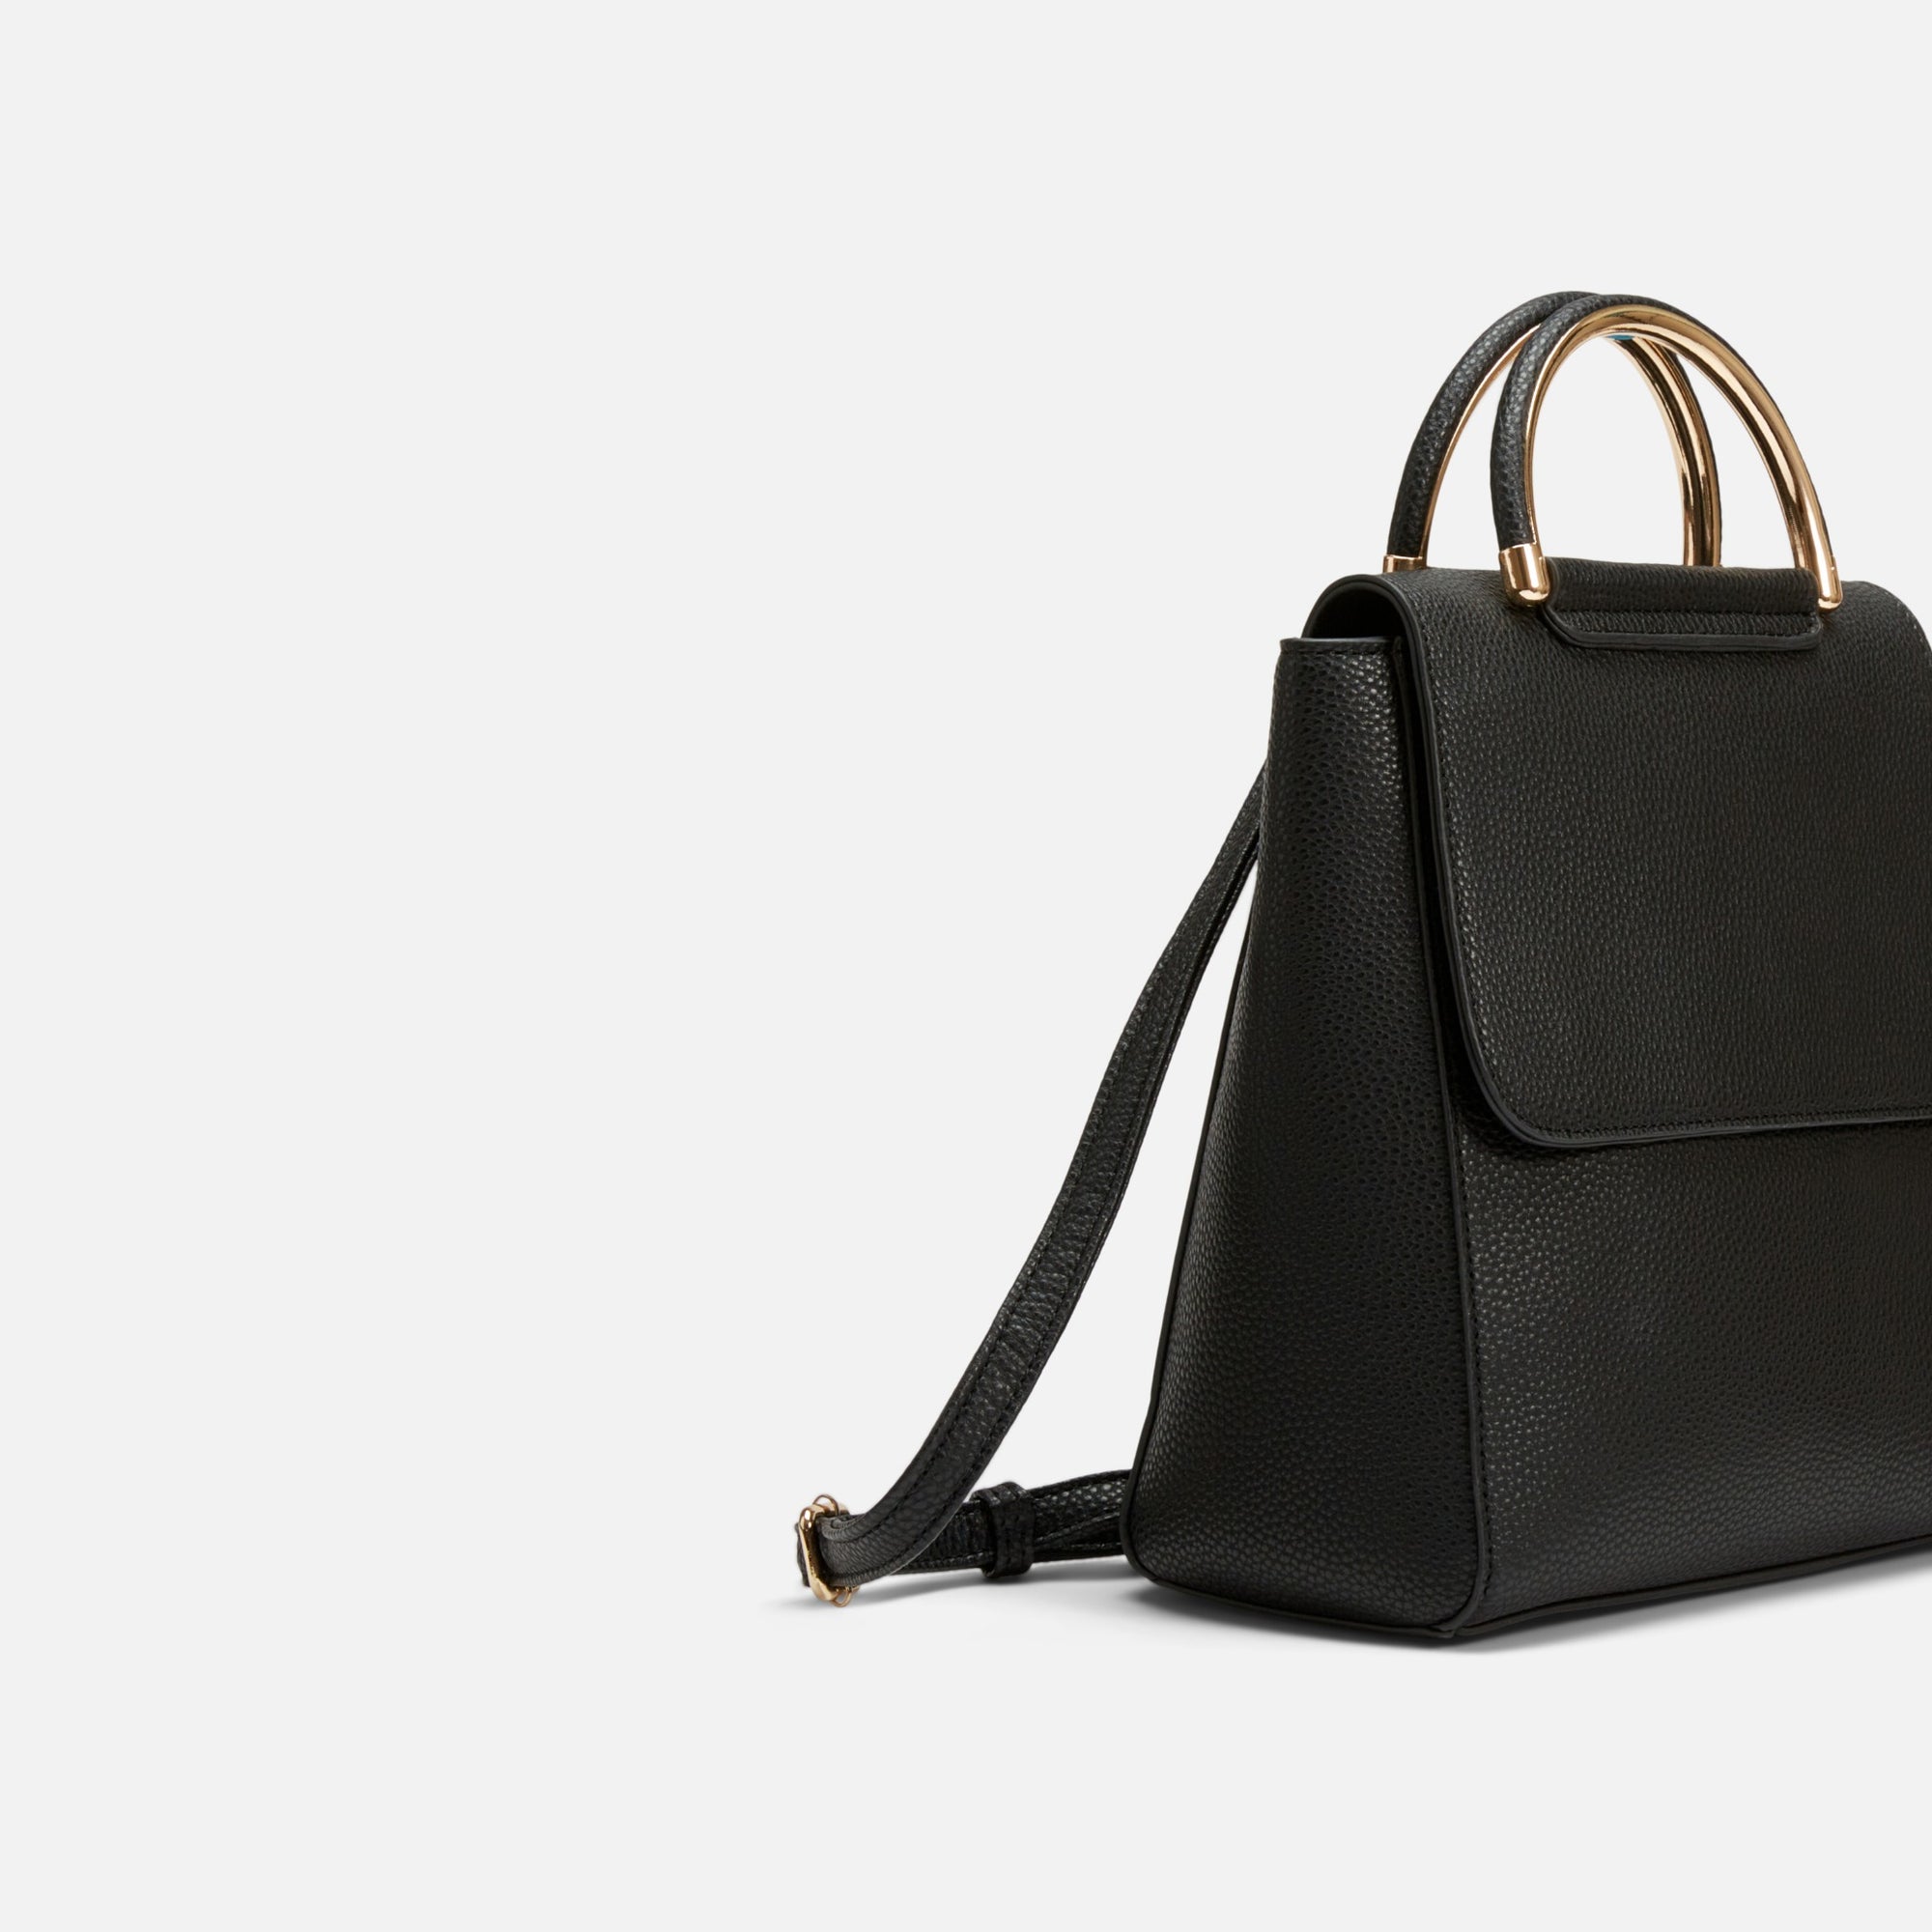 Black backpack with gold handle